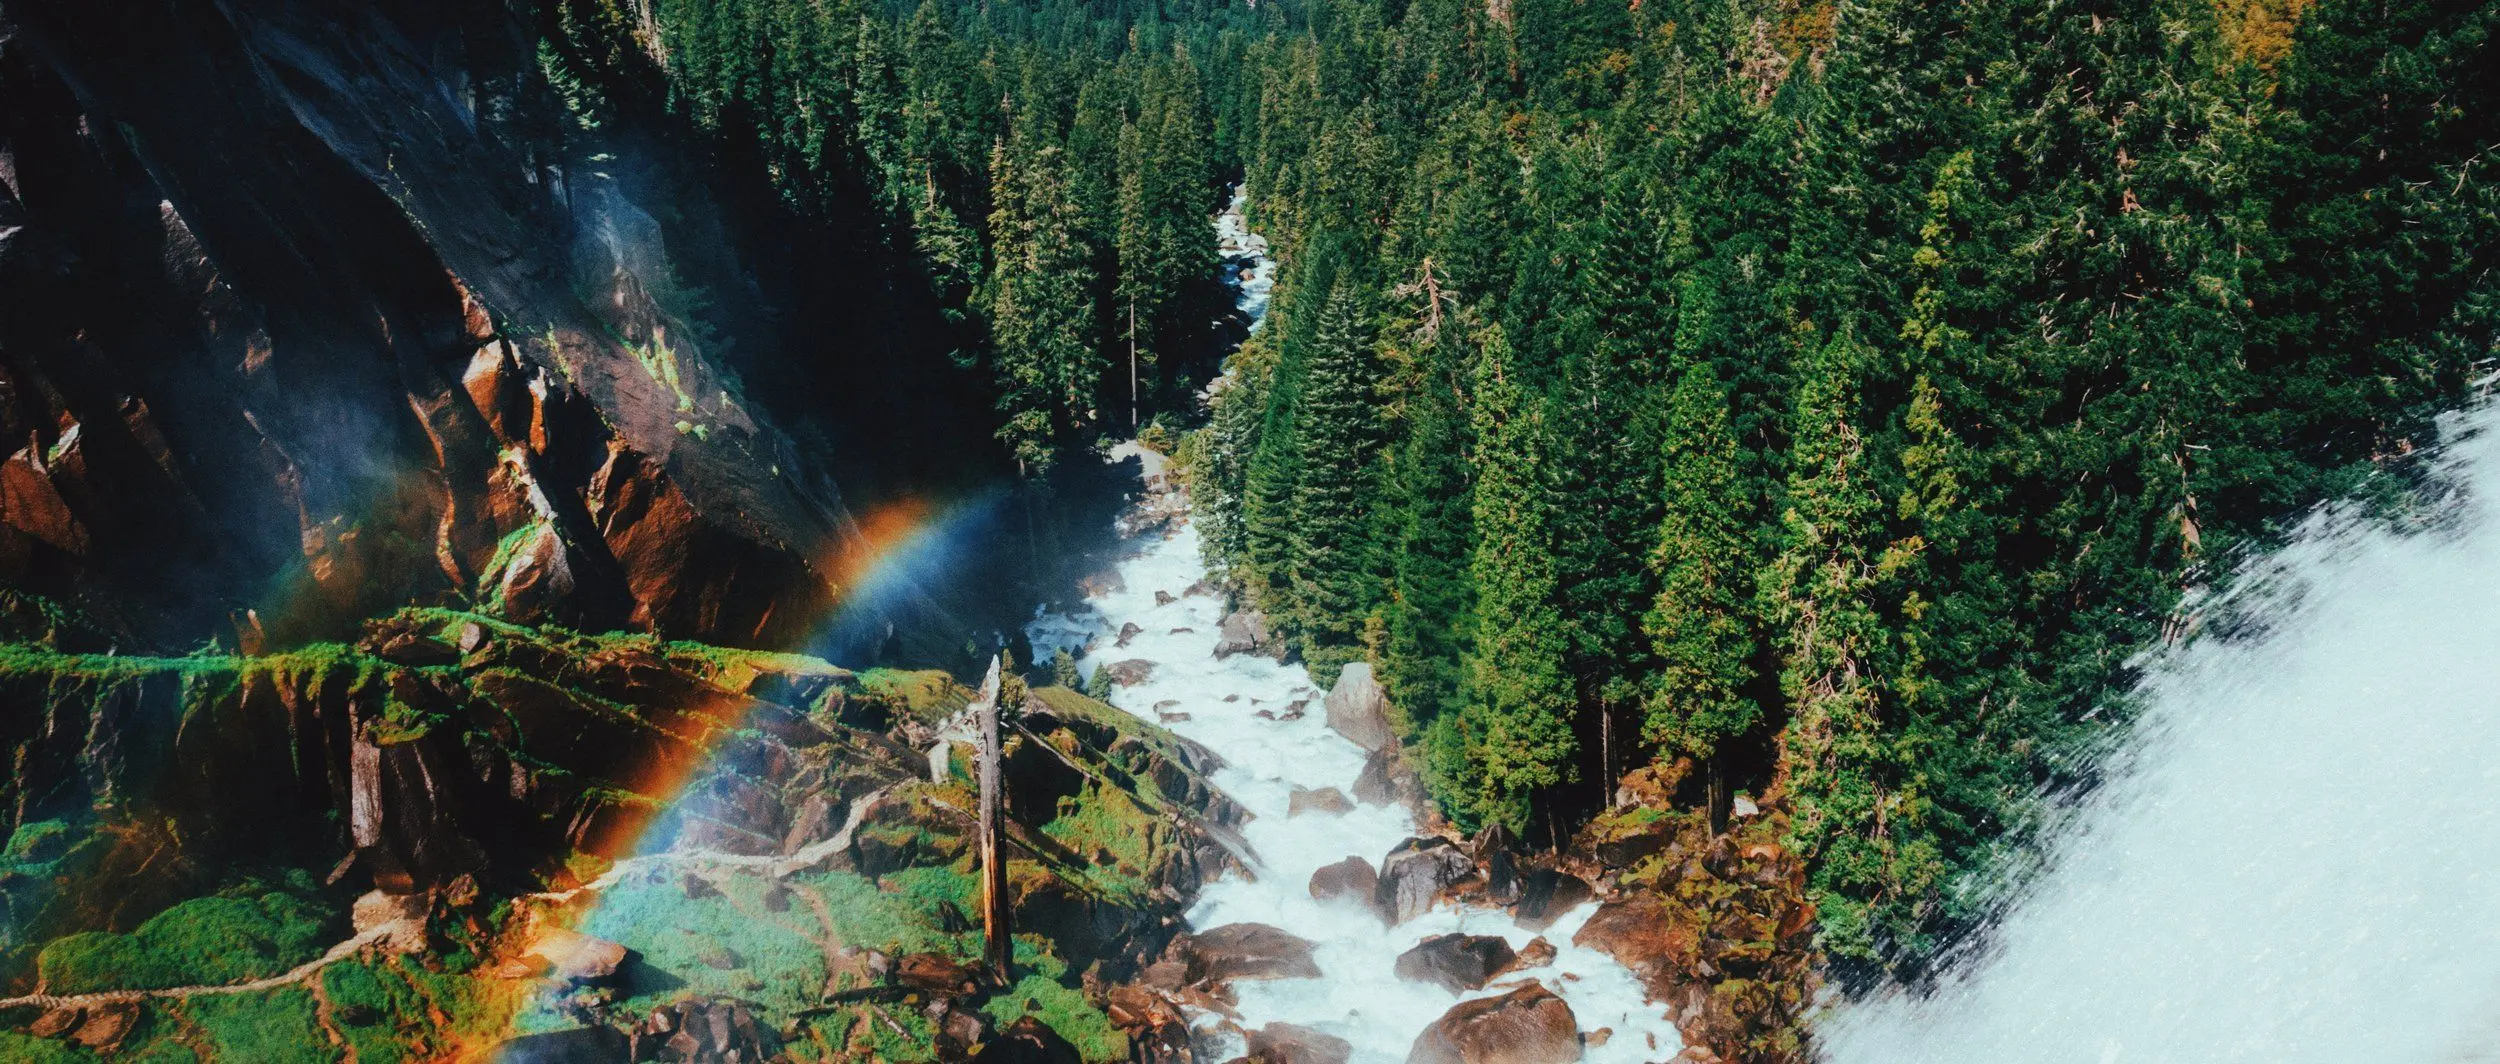 Aerial shot of the Merced River and a misty double rainbow as seen from Vernal Fall.